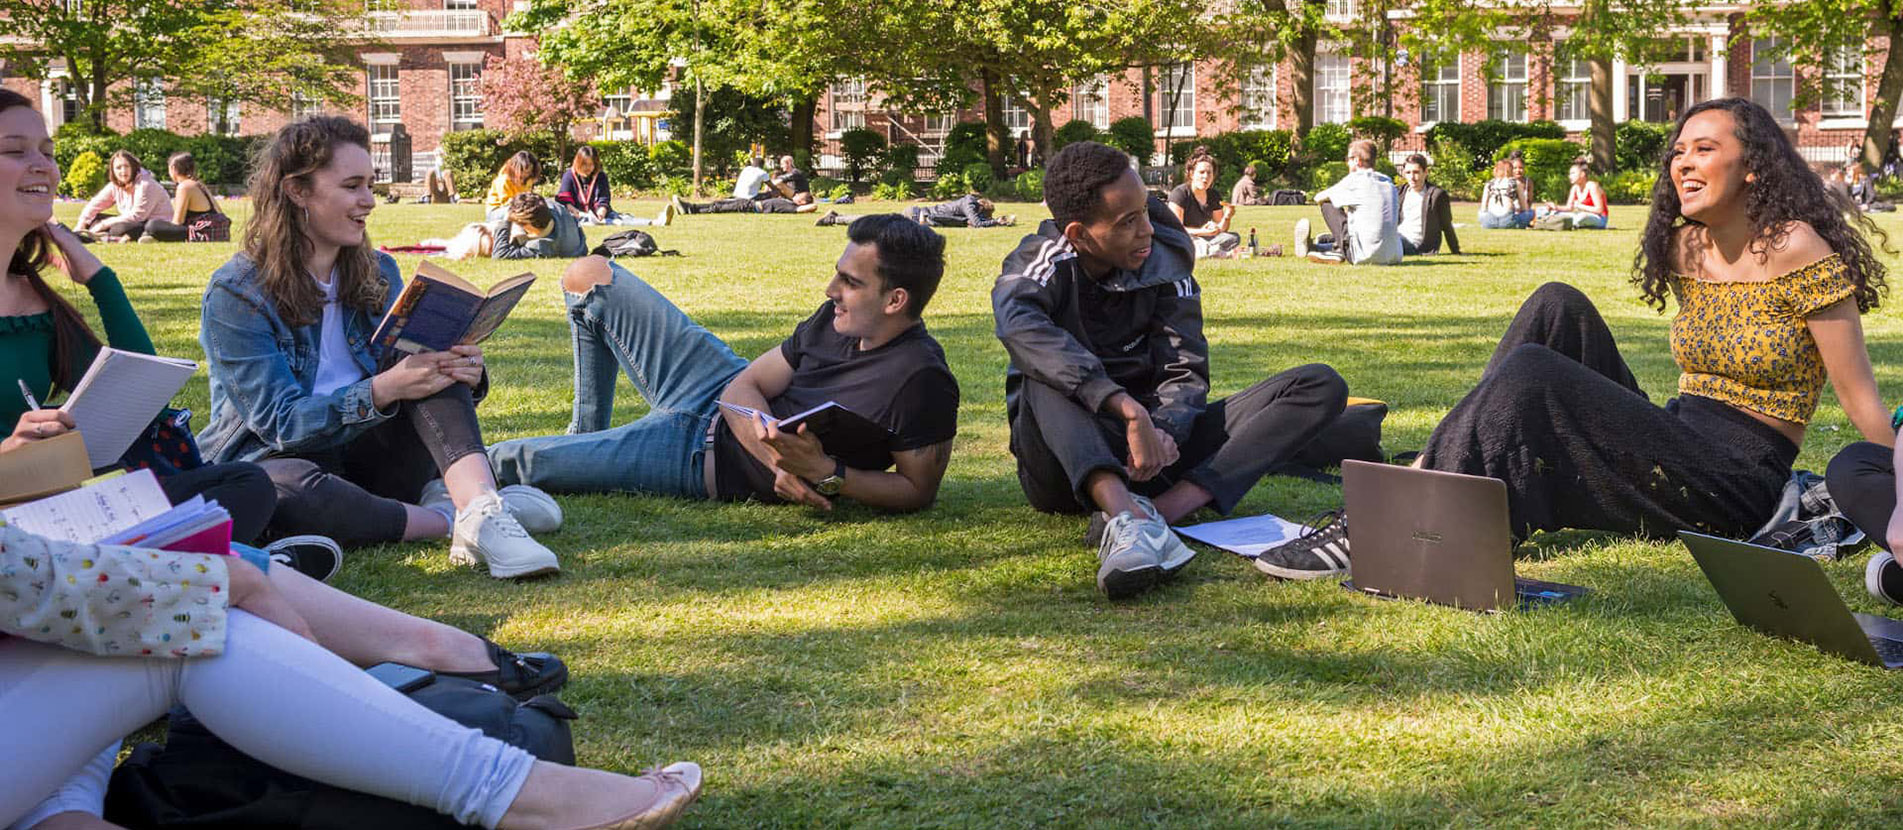 Students sitting in Abercromby Square at the University of Liverpool